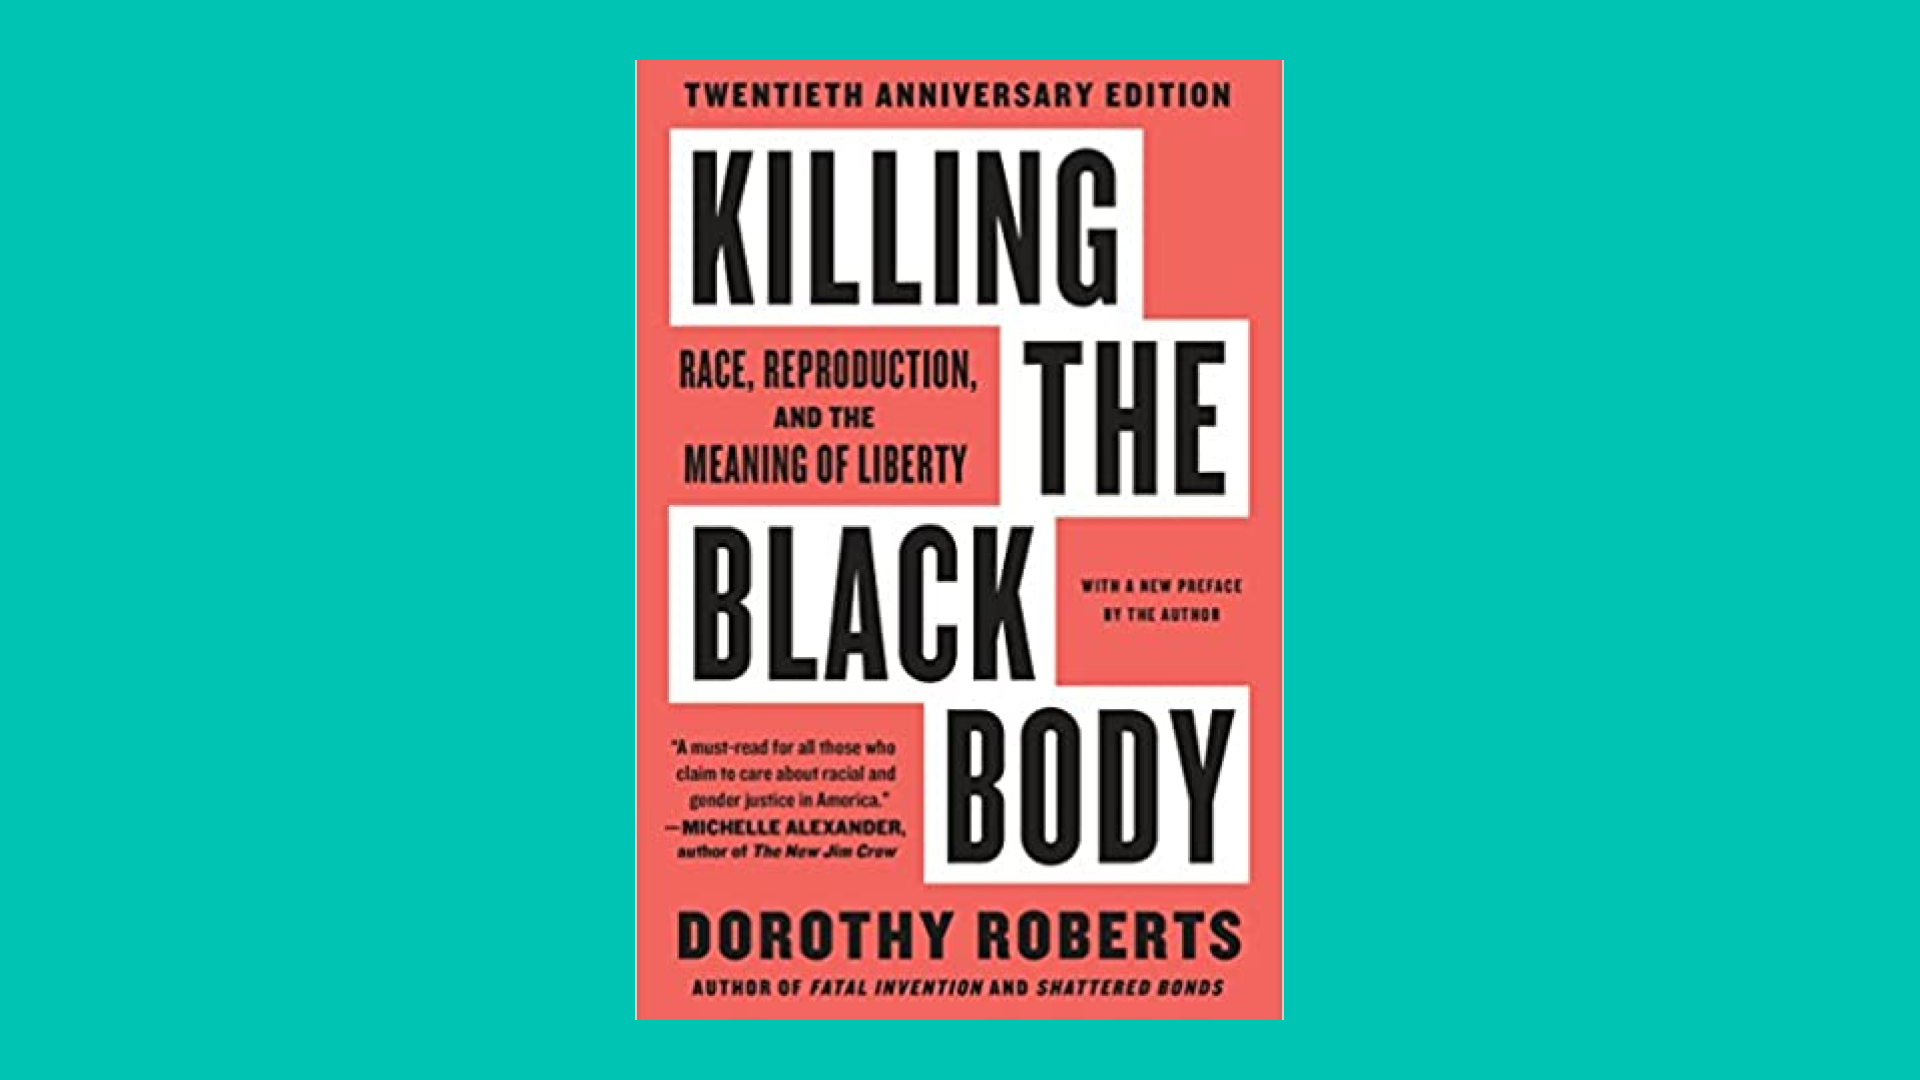 “Killing the Black Body: Race, Reproduction, and the Meaning of Liberty” by Dorothy Roberts 